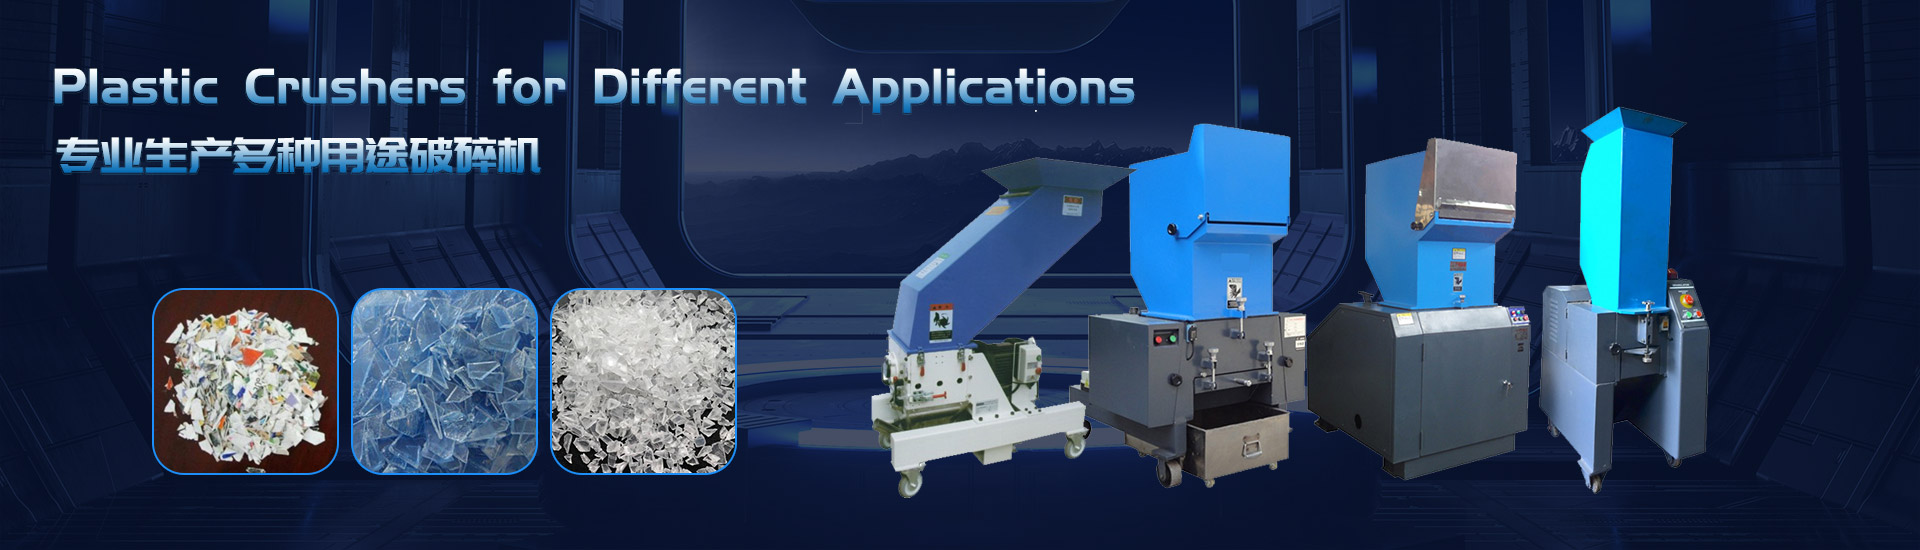 Plastic Crushers for Different Applications